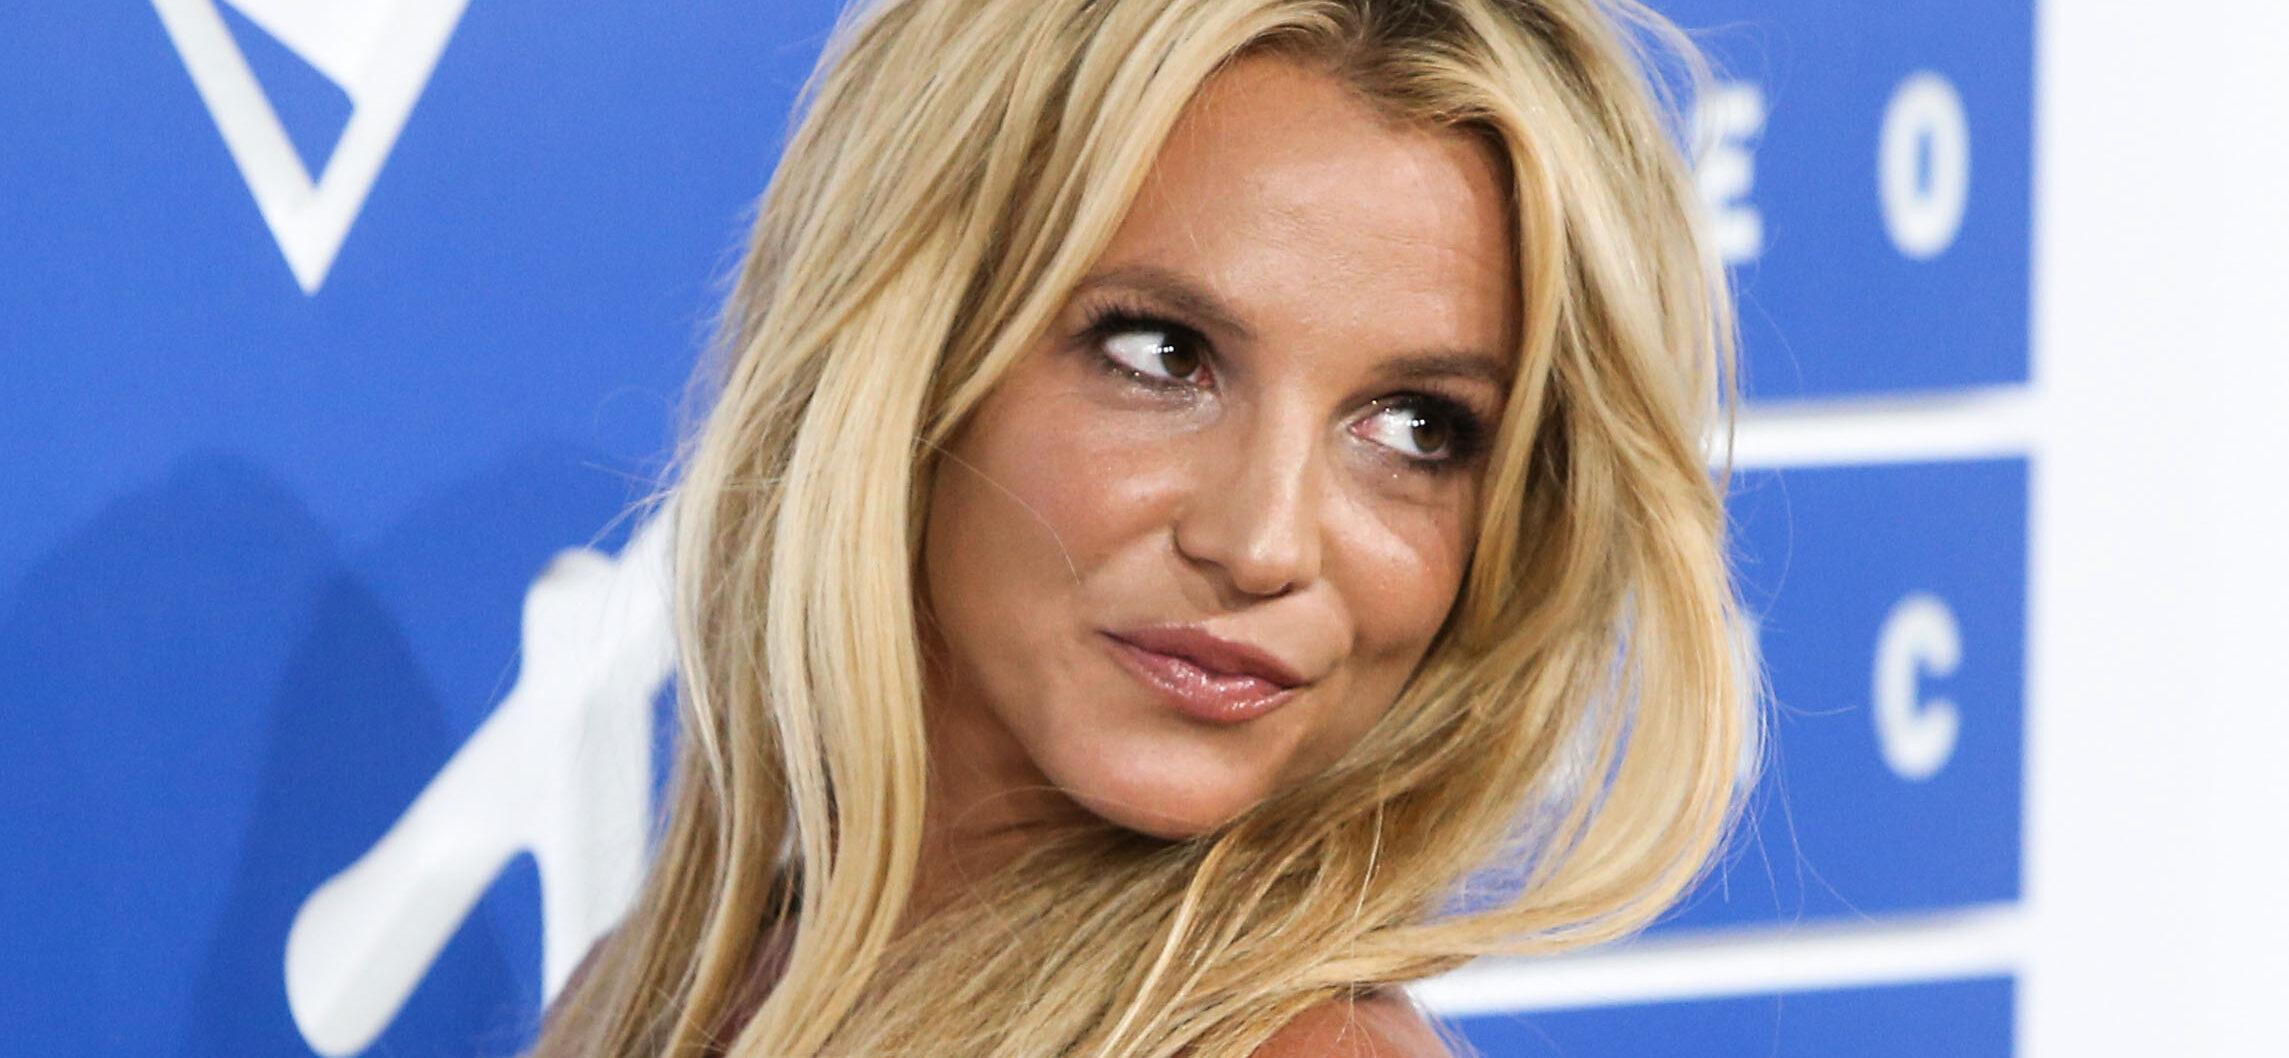 Eyewitness Claims Britney Spears Said She Was ‘Punched’ By Security Guard